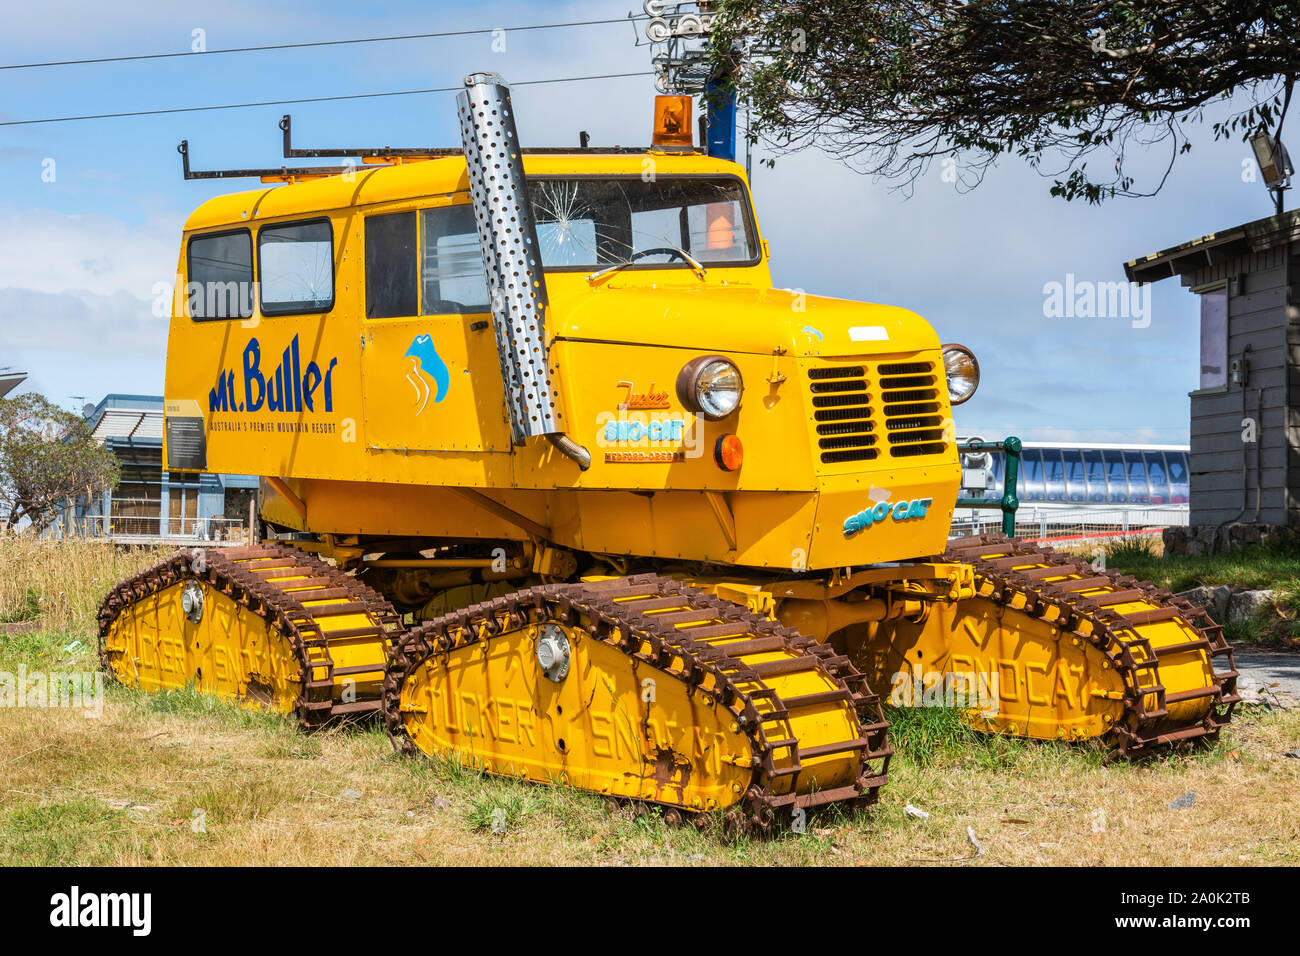 Mt Buller, Victoria, Australia – March 23, 2017. Tucker Sno-Cat tracked vehicle for snow conditions, at Mt Buller ski resort in Victoria, Australia. Stock Photo